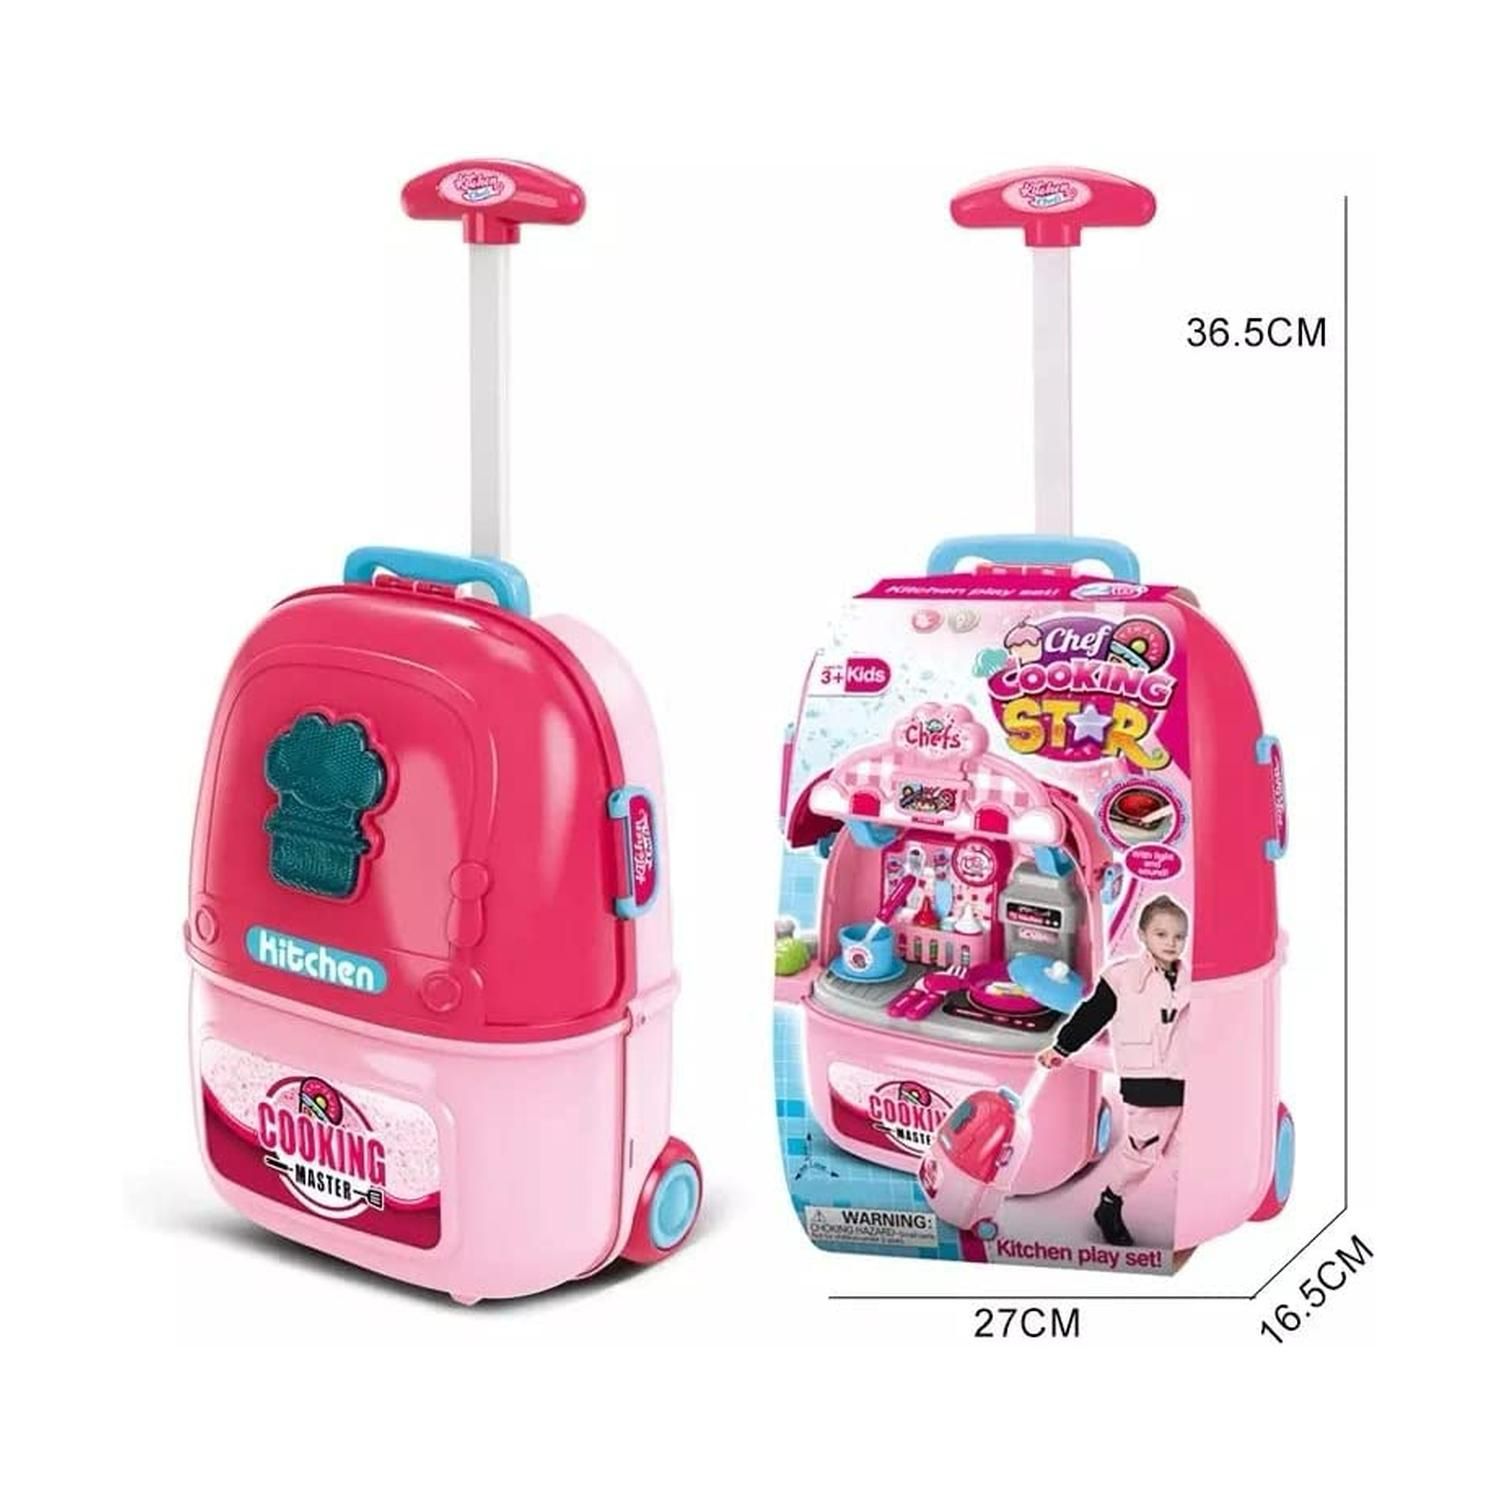 Chef Cooking Star - Kitchen play set Pink